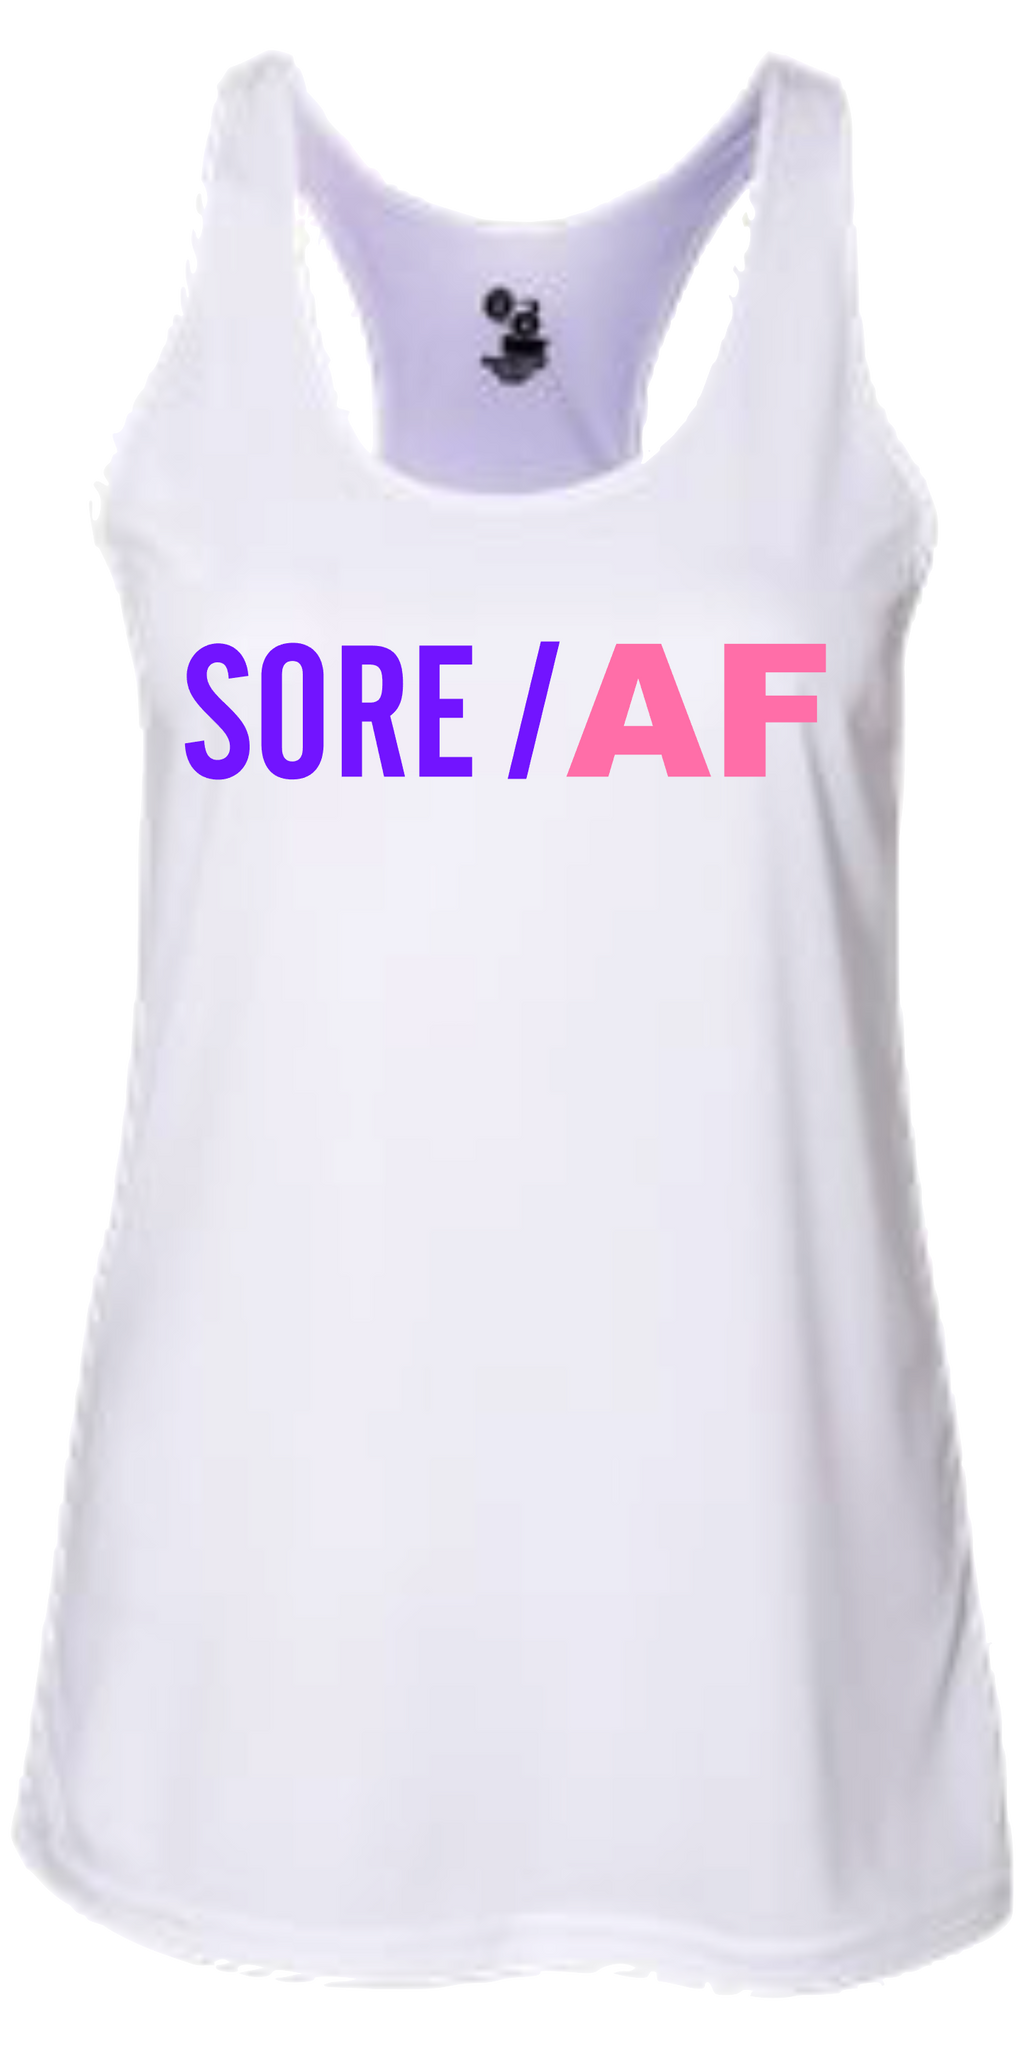 Sore/ AF Tee Shirt White Racerback Pink and Purple